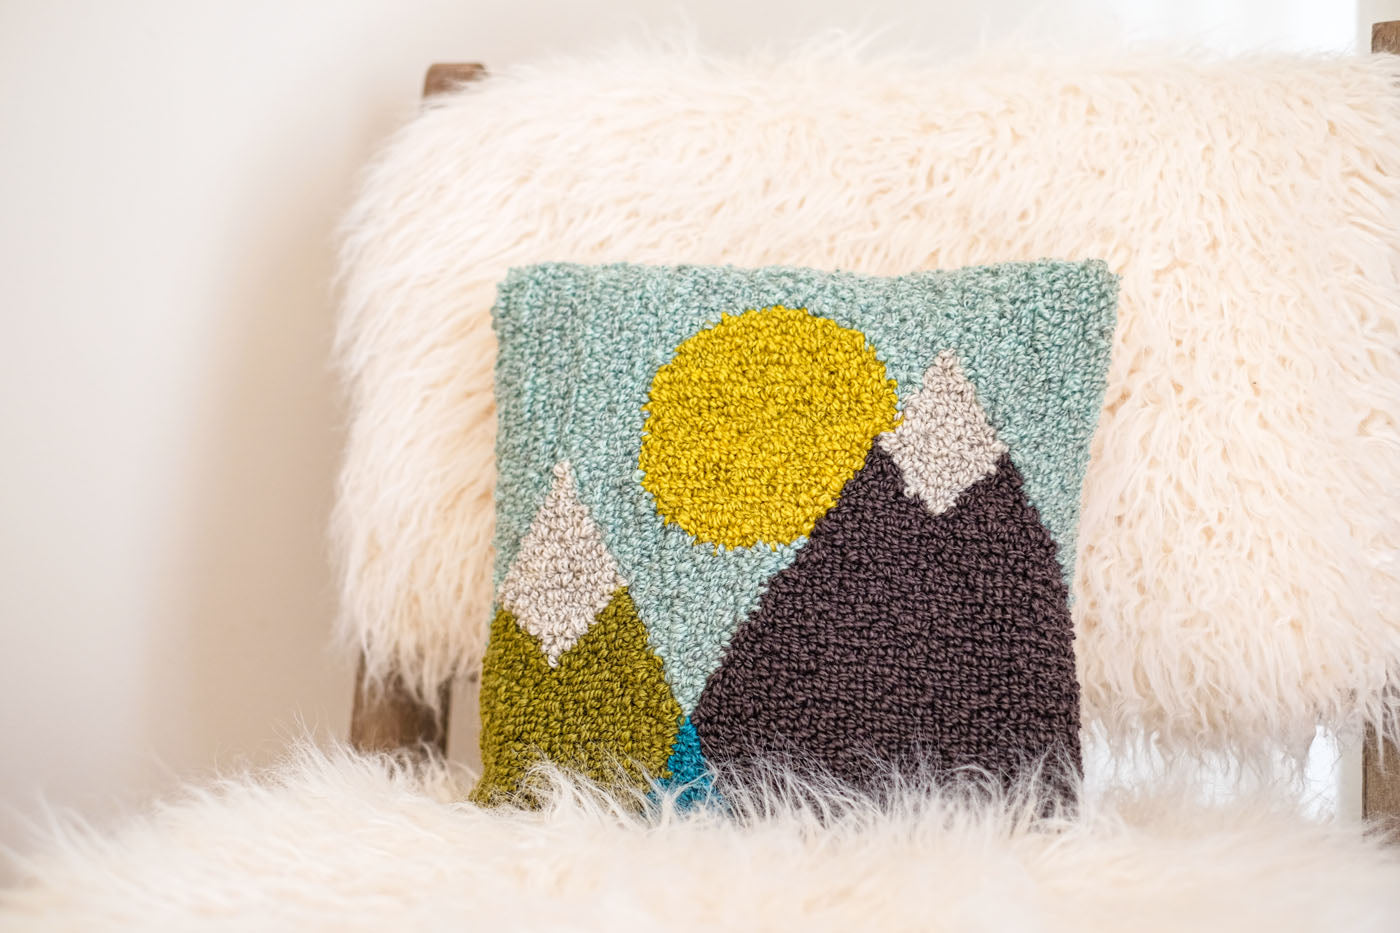 A punch needle pillow with geometric mountain and sun design. It is made in hues of green, blues, yellow, and grey, and is sitting on a plush sheepskin chair.